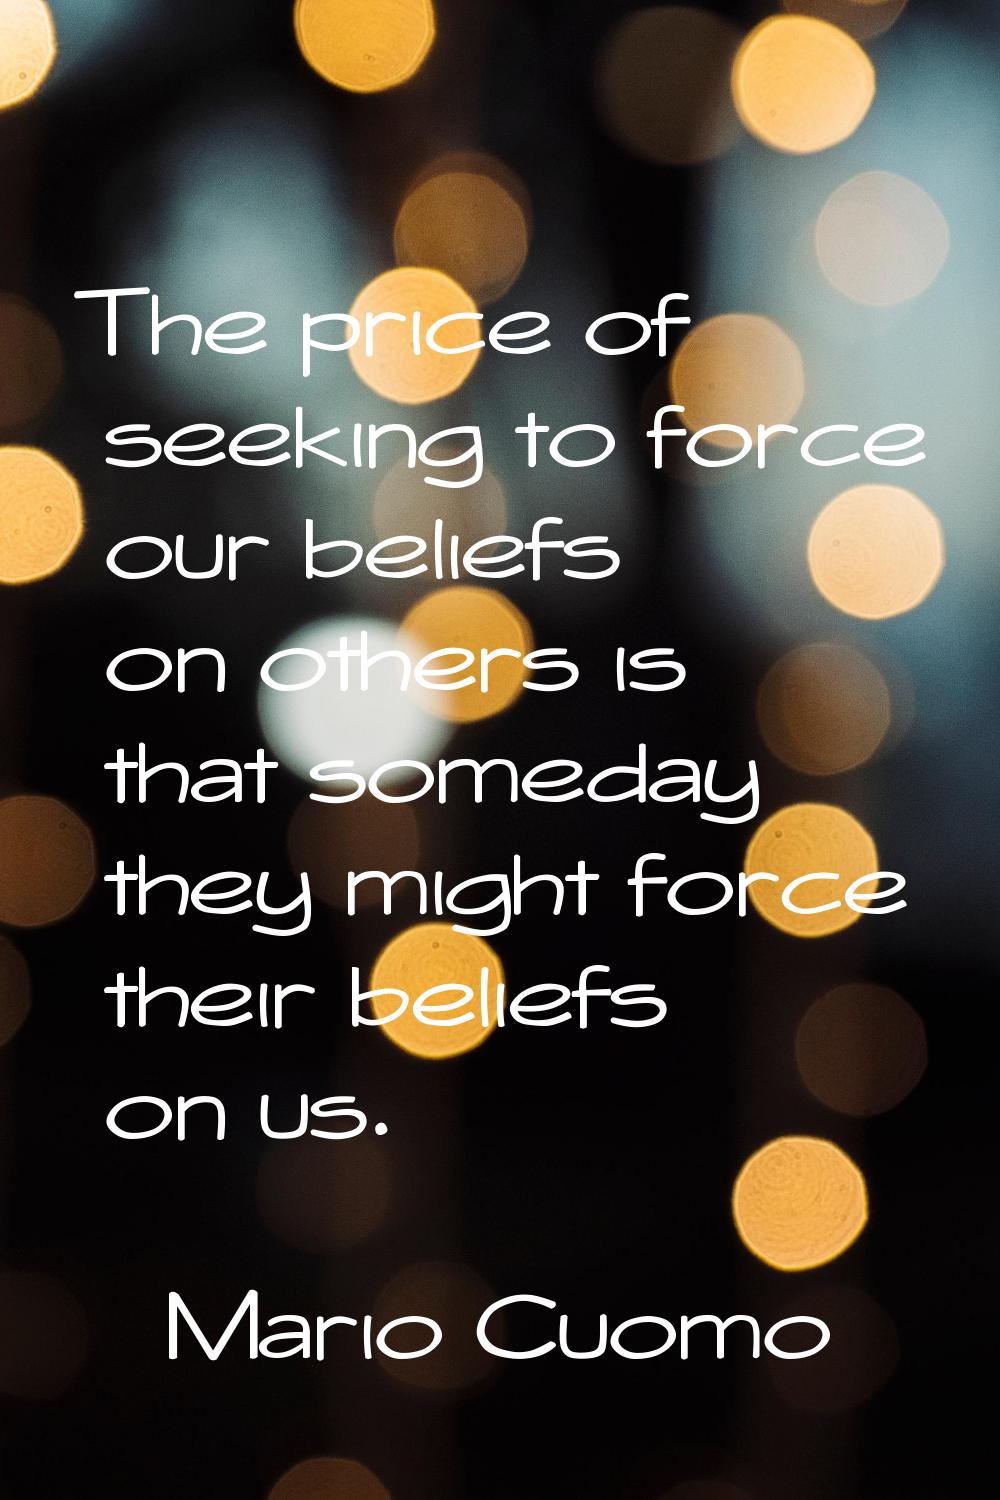 The price of seeking to force our beliefs on others is that someday they might force their beliefs 